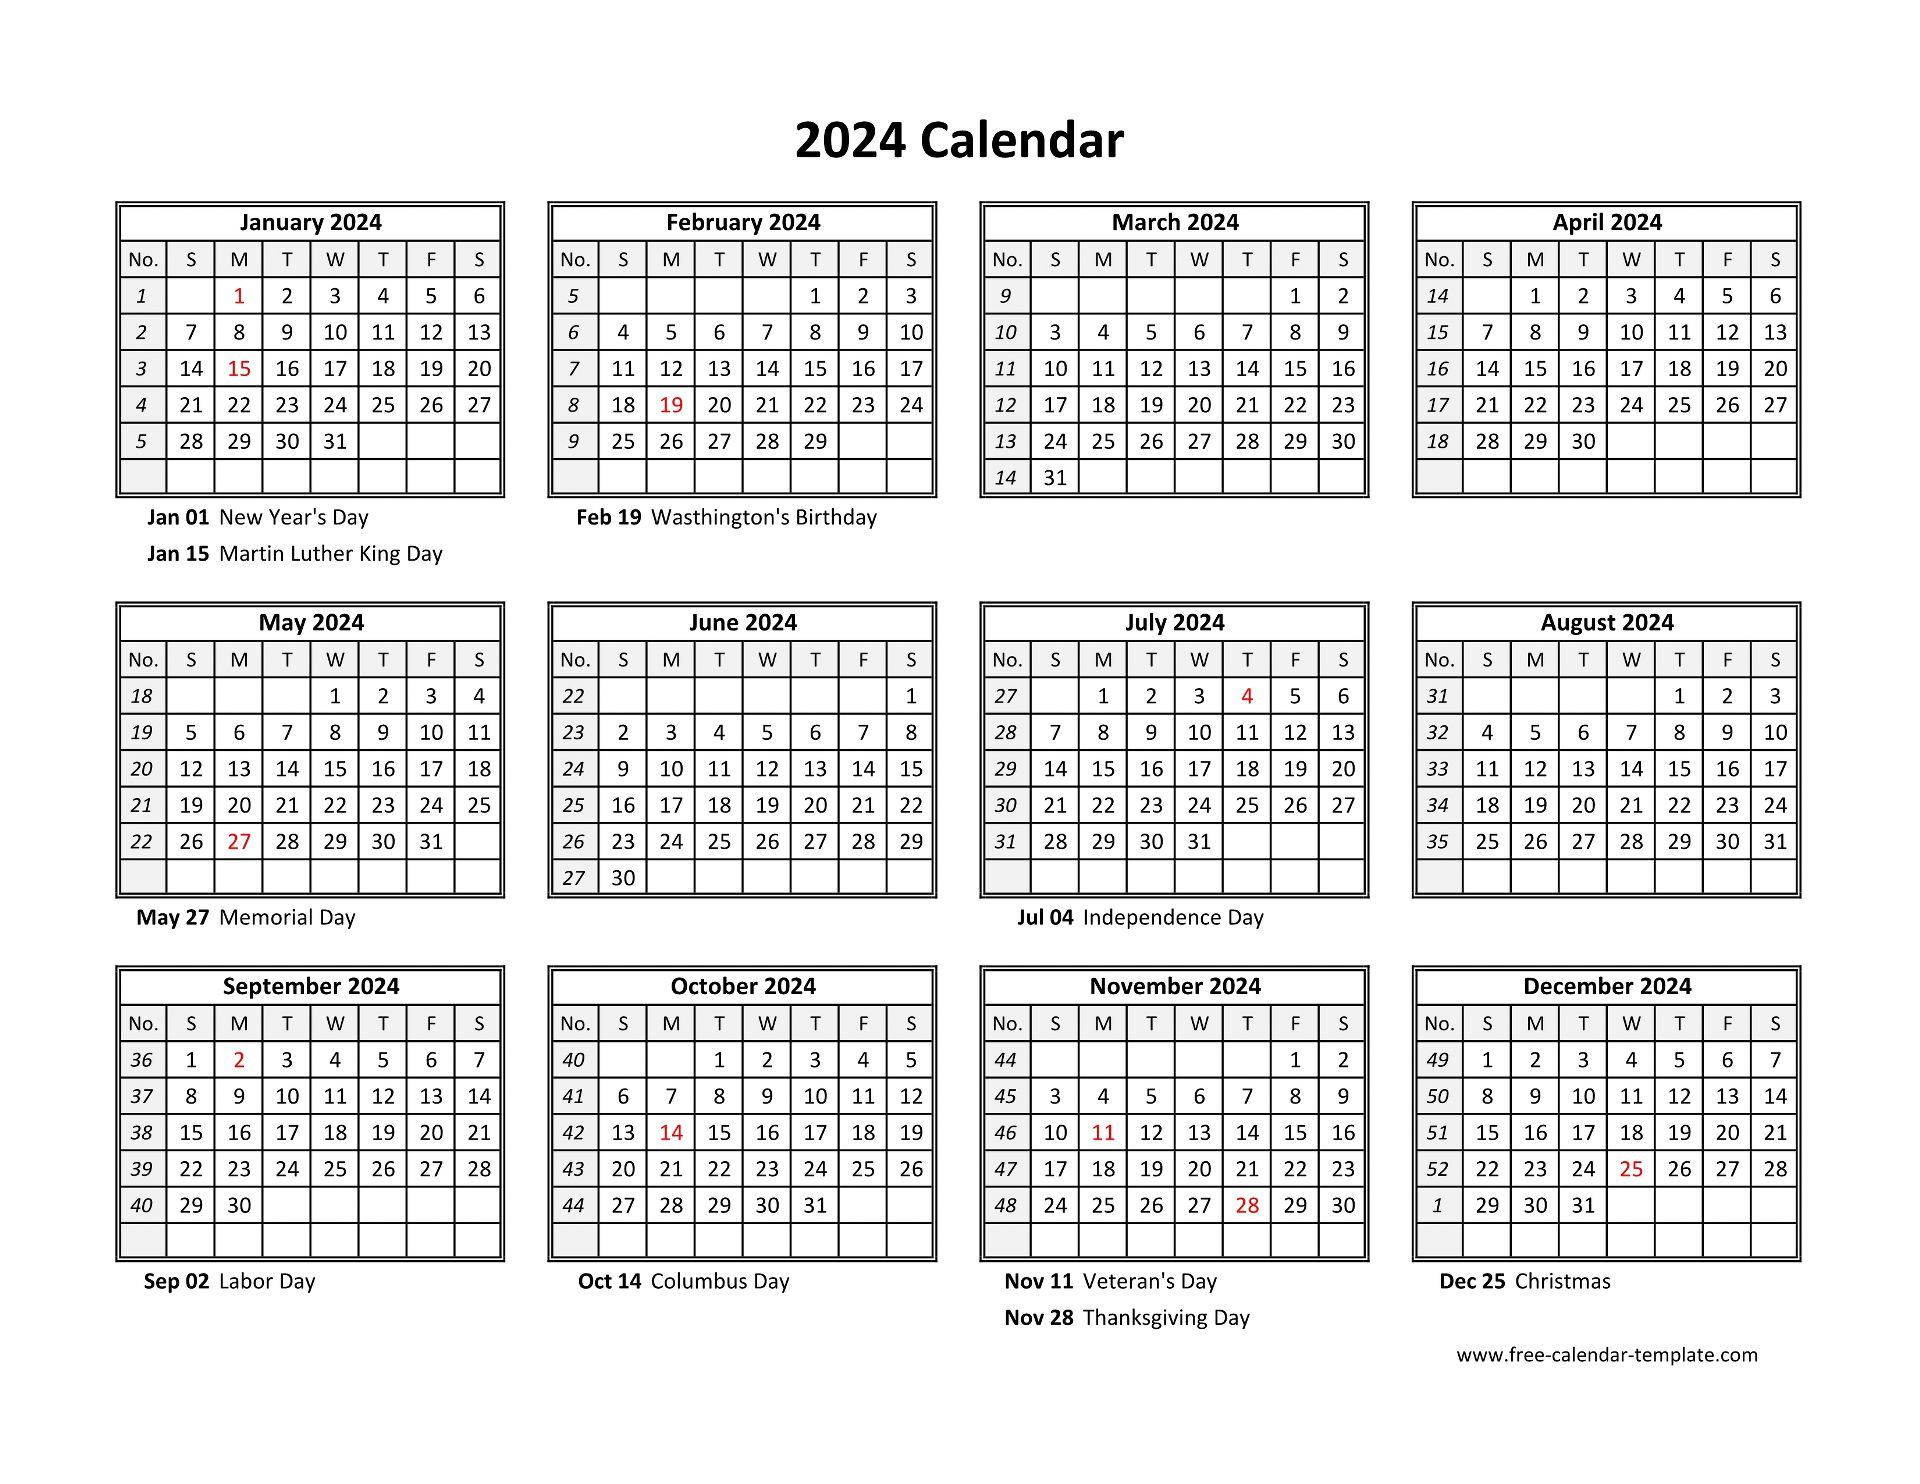 Yearly Calendar 2024 Printable With Federal Holidays | Free | Free Printable Calendar 2024 With Holidays